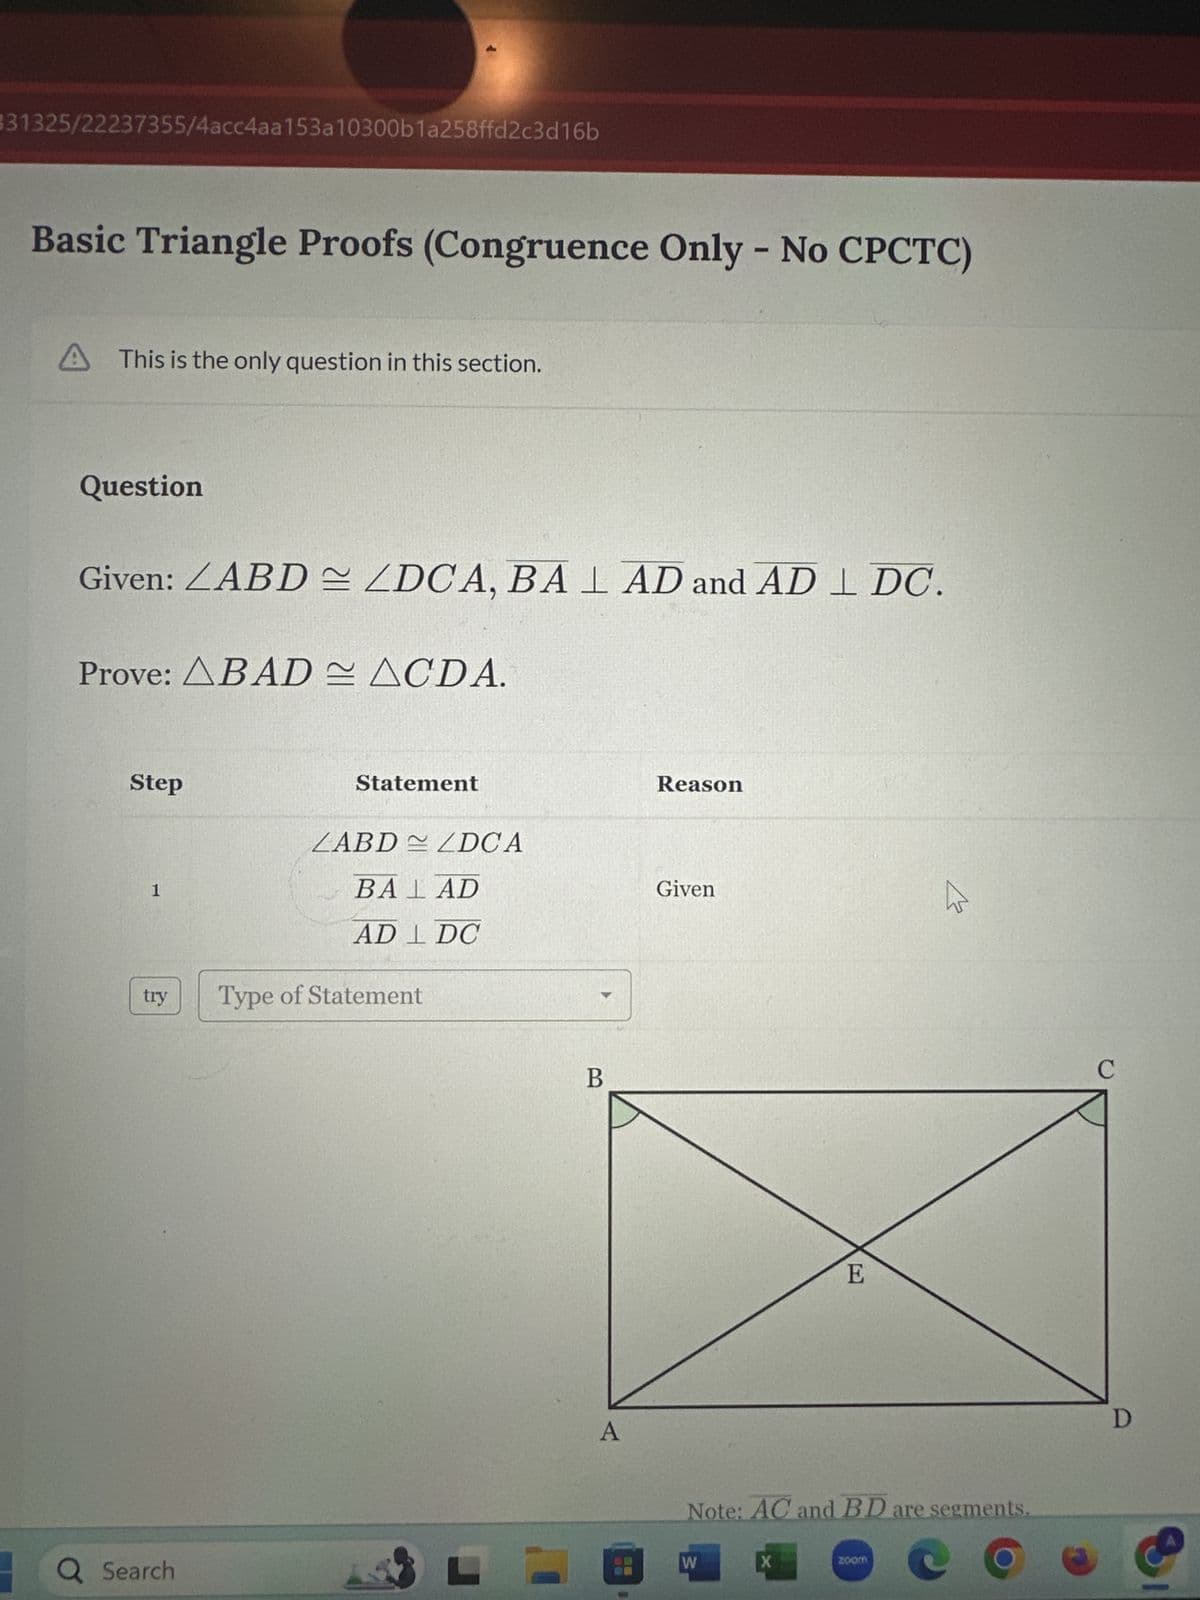 331325/22237355/4acc4aa153a10300b1a258ffd2c3d16b
Basic Triangle Proofs (Congruence Only - No CPCTC)
A This is the only question in this section.
Question
Given: ABD ZDCA, BAL AD and ADL DC.
Prove: ABAD ACDA.
Step
1
try
Q Search
Statement
LABDZDCA
BALAD
AD 1 DC
Type of Statement
L
B
A
Reason
Given
W
E
Note: AC and BD are segments.
X
E
zoom
C
D